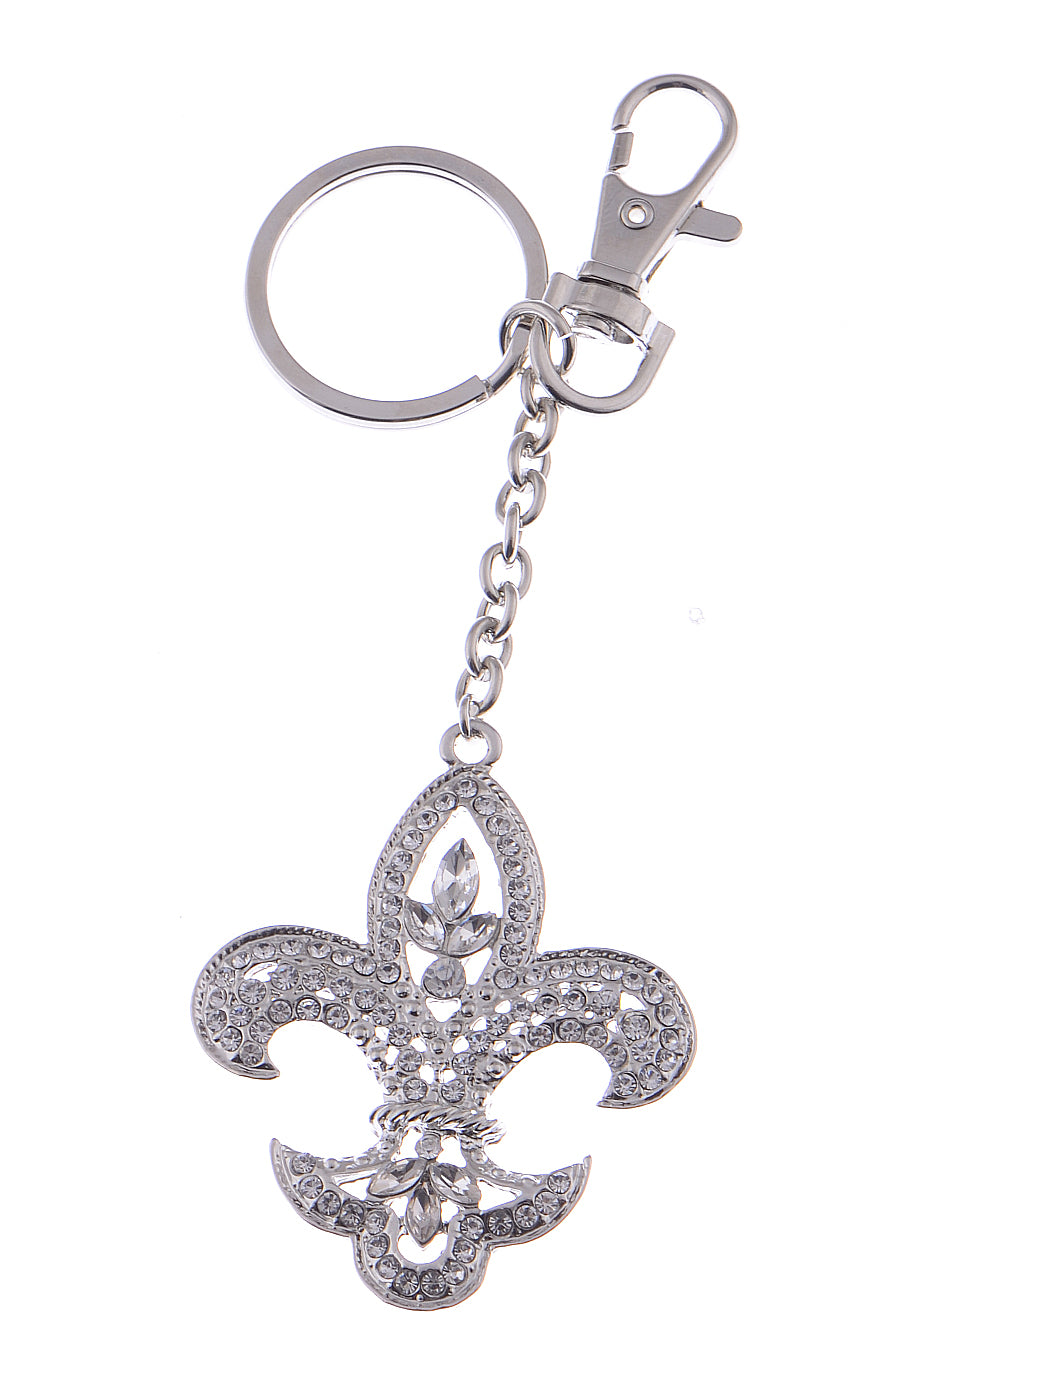 Colored French Fluer De Lis Lily Key Chain